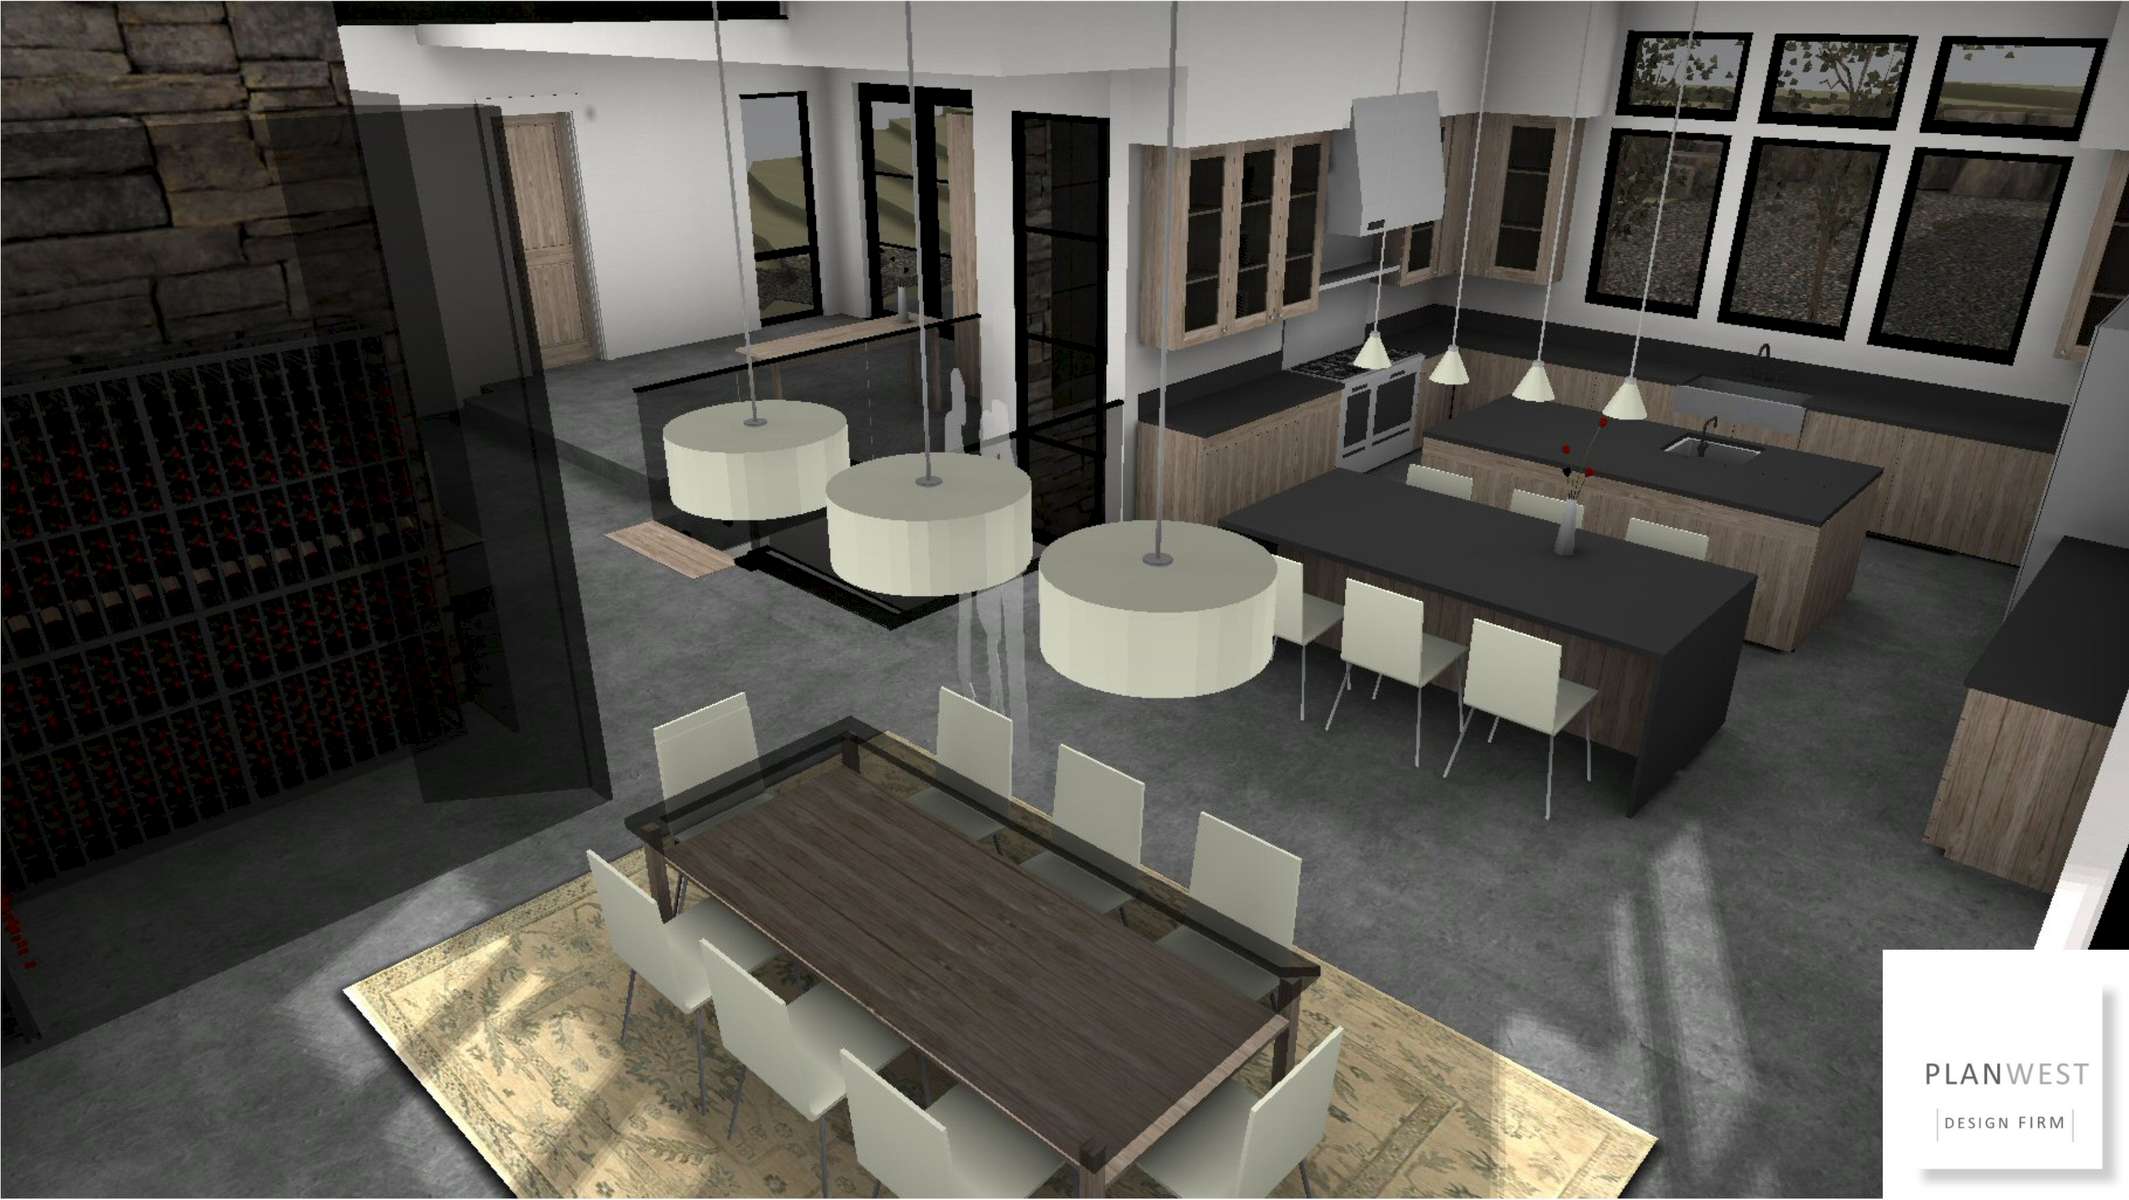 Plan-West-Design-Firm_Projects-in-process-1501